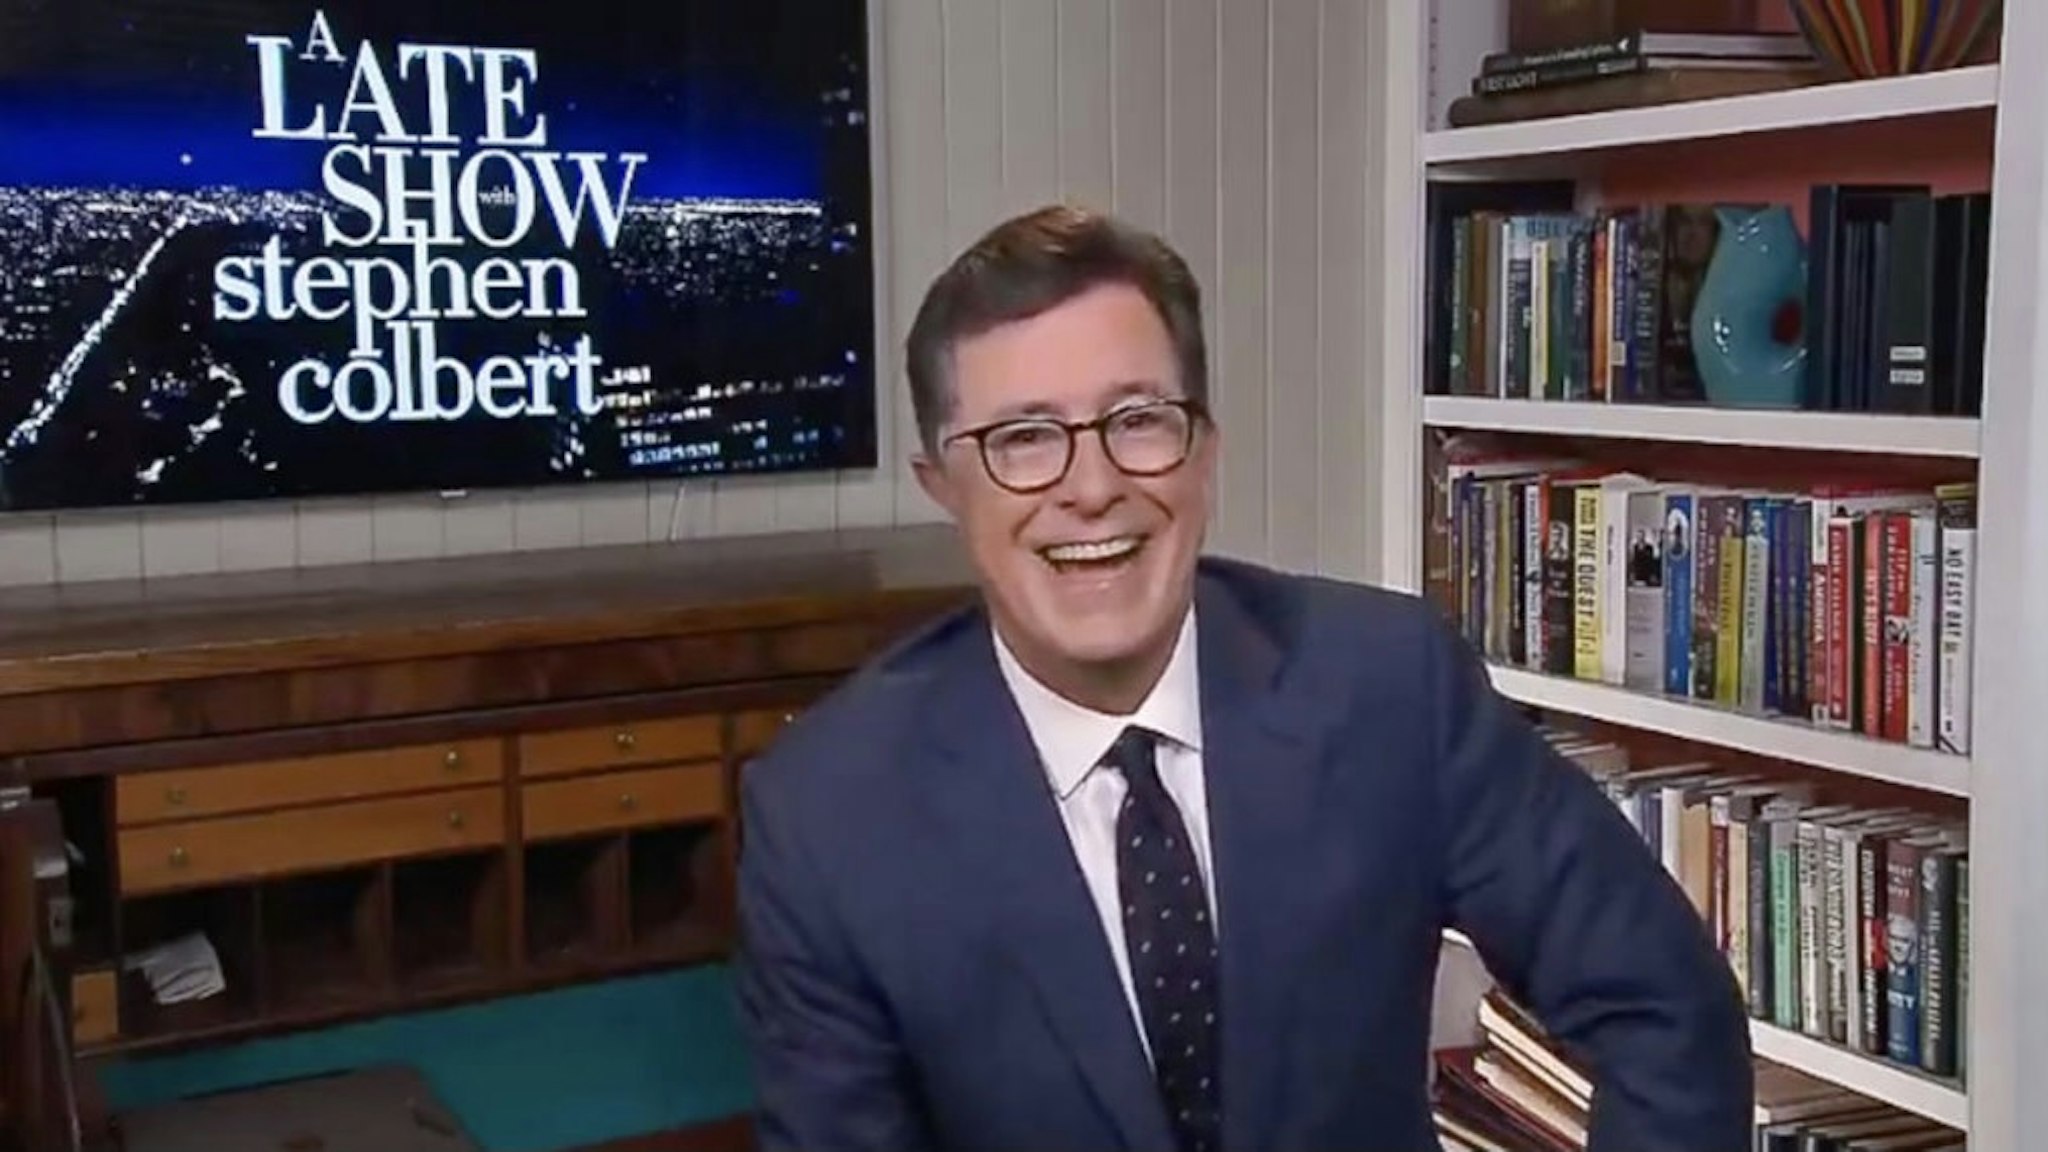 NEW YORK - MARCH 30: The Late Show with Stephen Colbert during Monday's March 30, 2020 show. Image is a screen grab. (Photo by CBS CBS Photo Archive / Contributor via Getty Images)